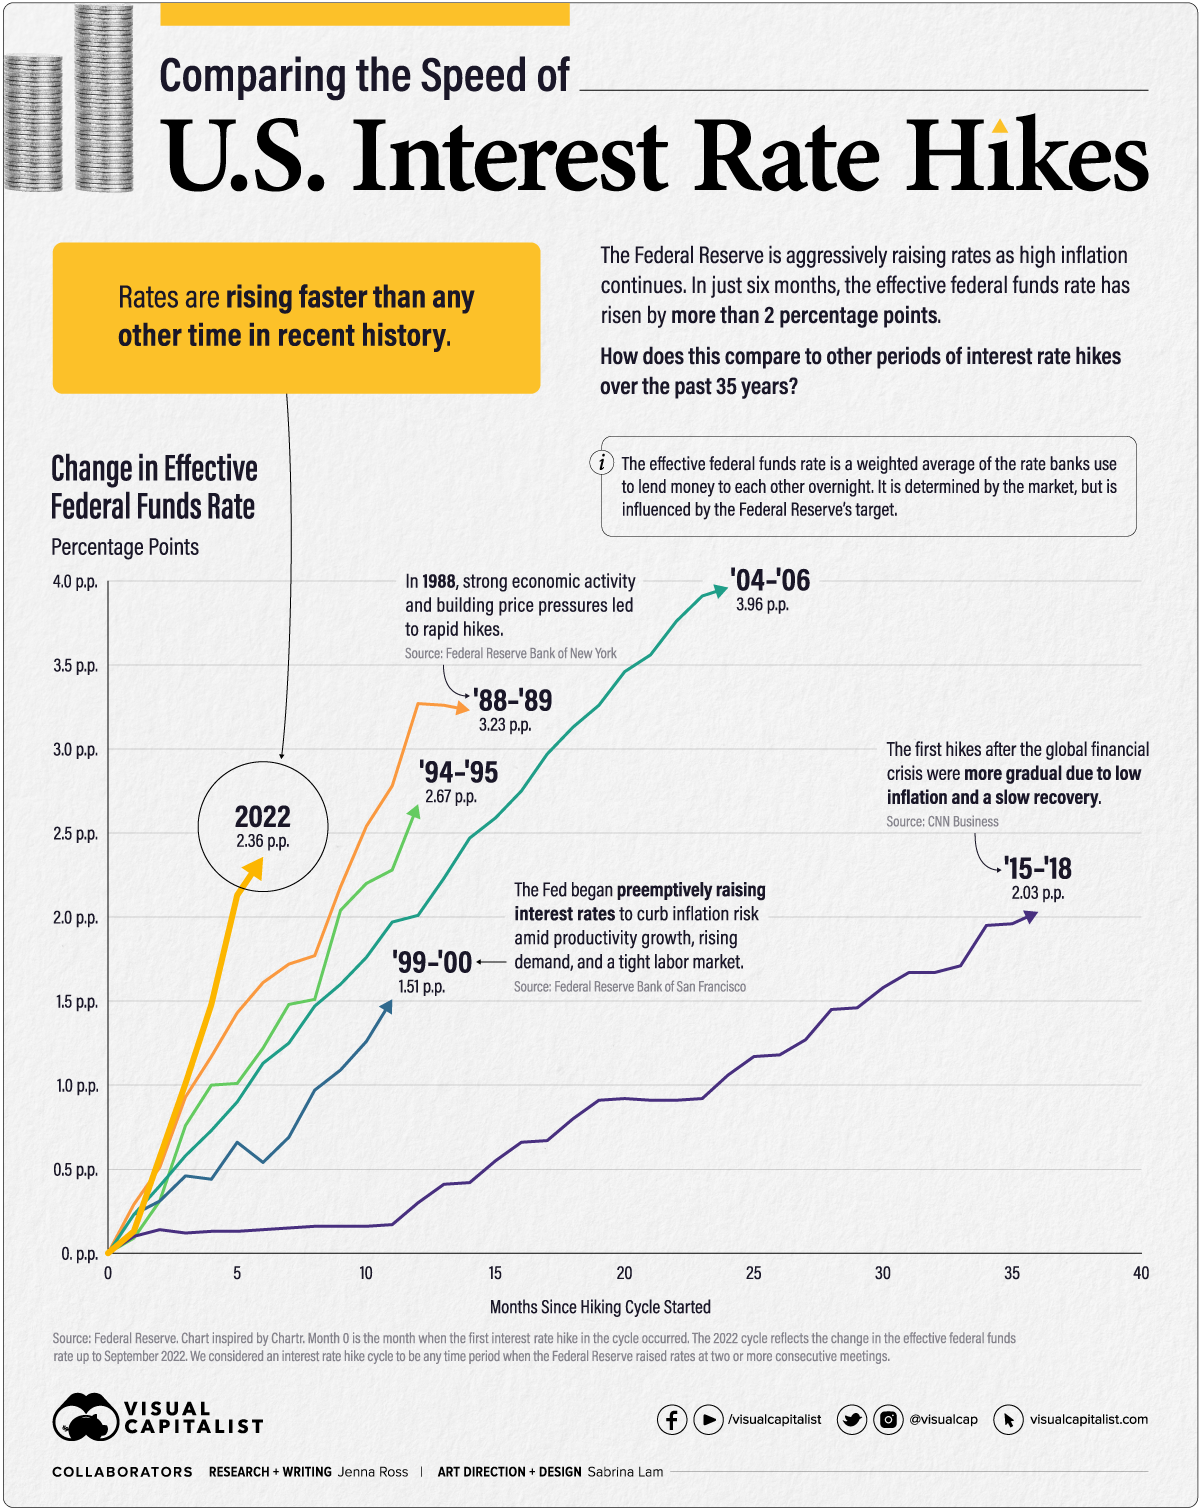 speed-of-interest-rate-hikes-2022.png